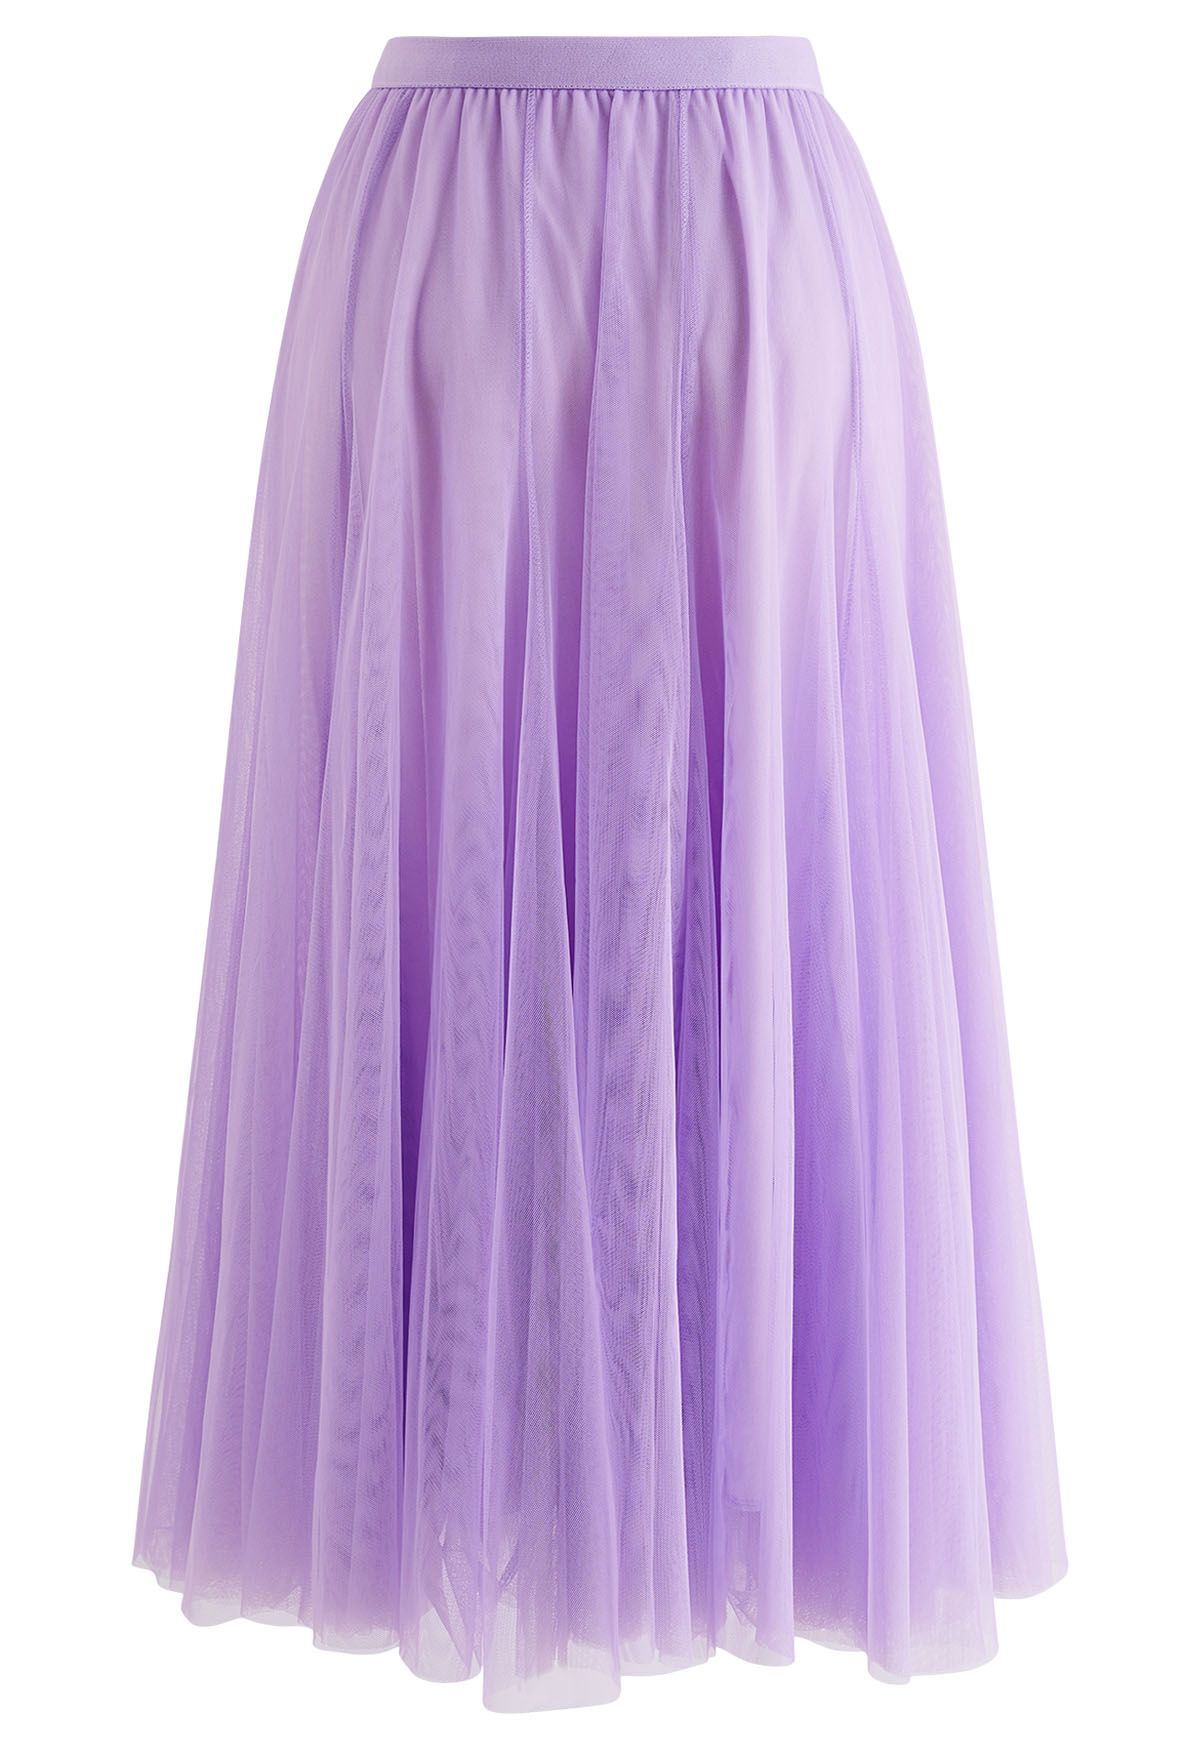 My Secret Garden Tulle Maxi Skirt in Lilac - Retro, Indie and Unique ...